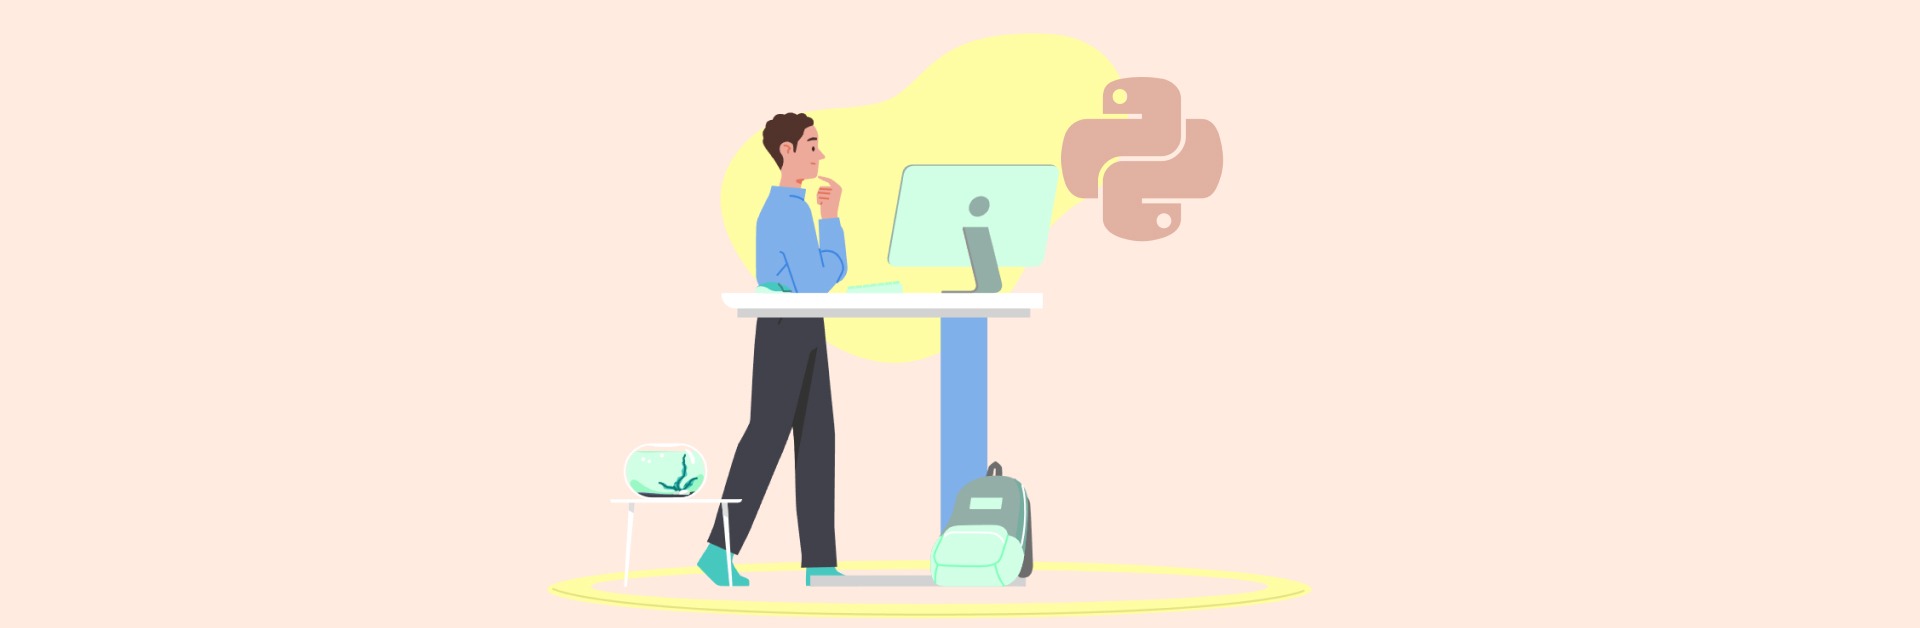 How to find and apply for python jobs